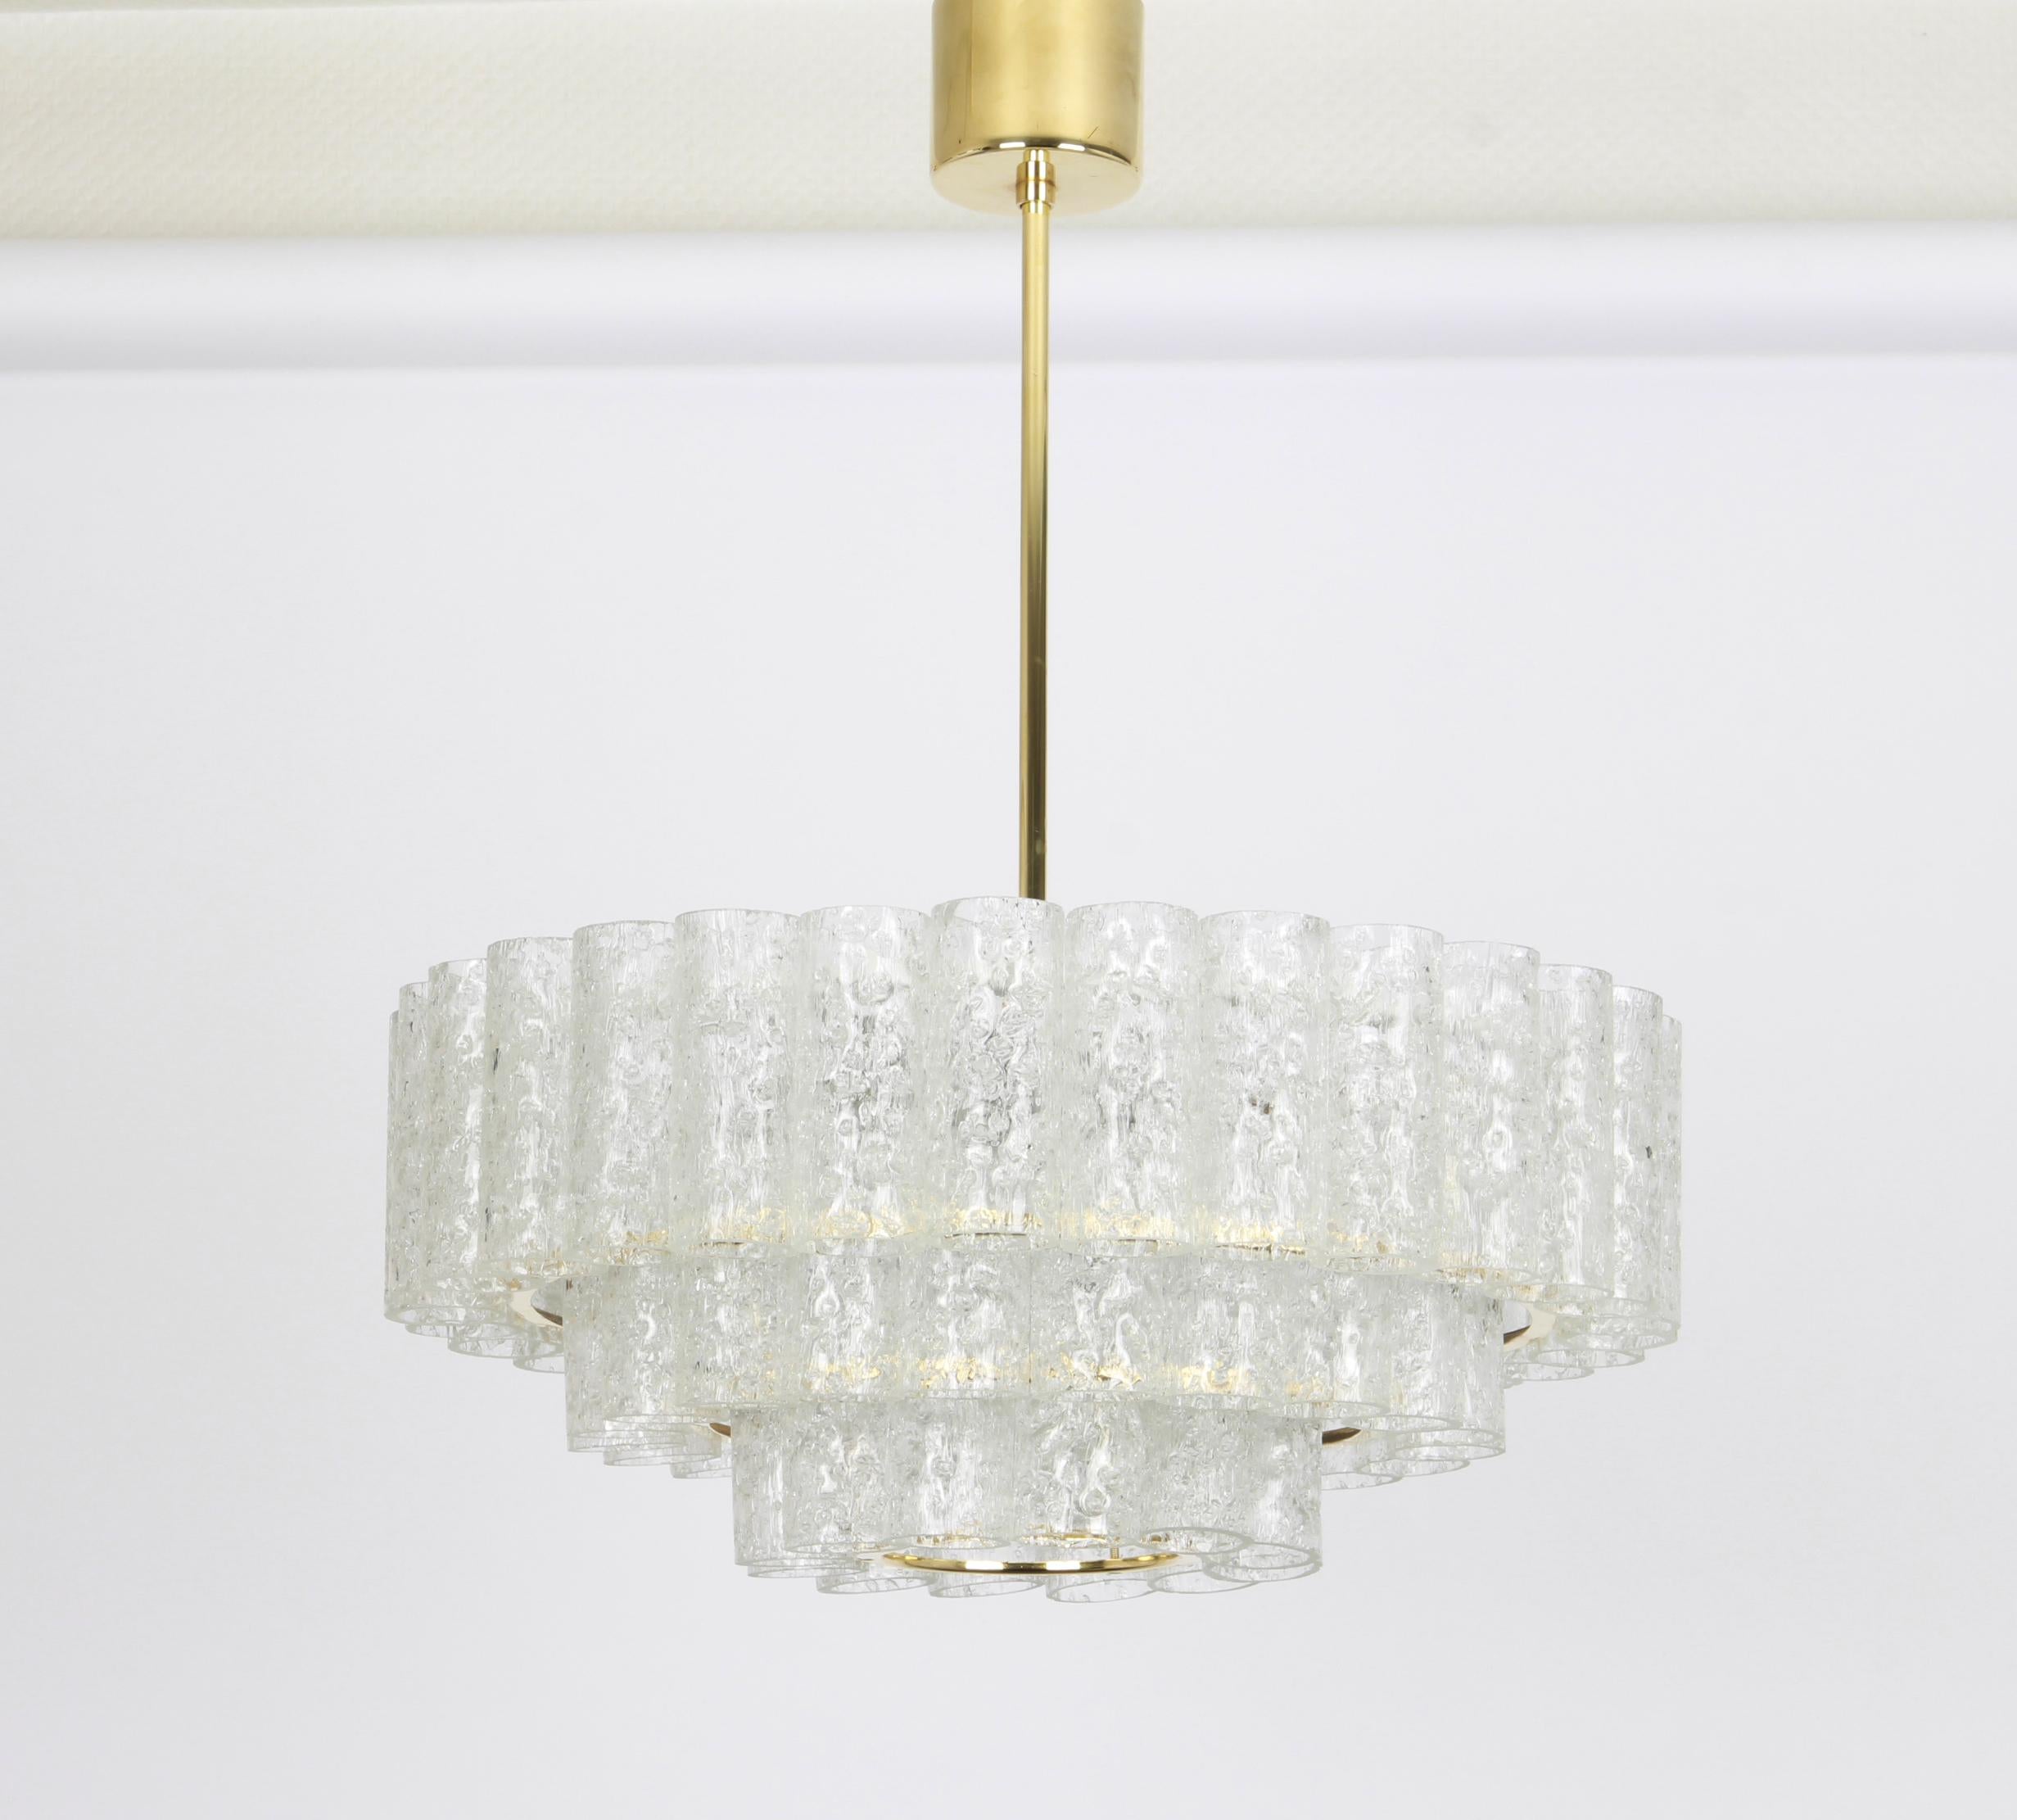 1 of 2 Stunning Murano Ice Glass Tubes Chandelier by Doria, Germany, 1960s For Sale 4